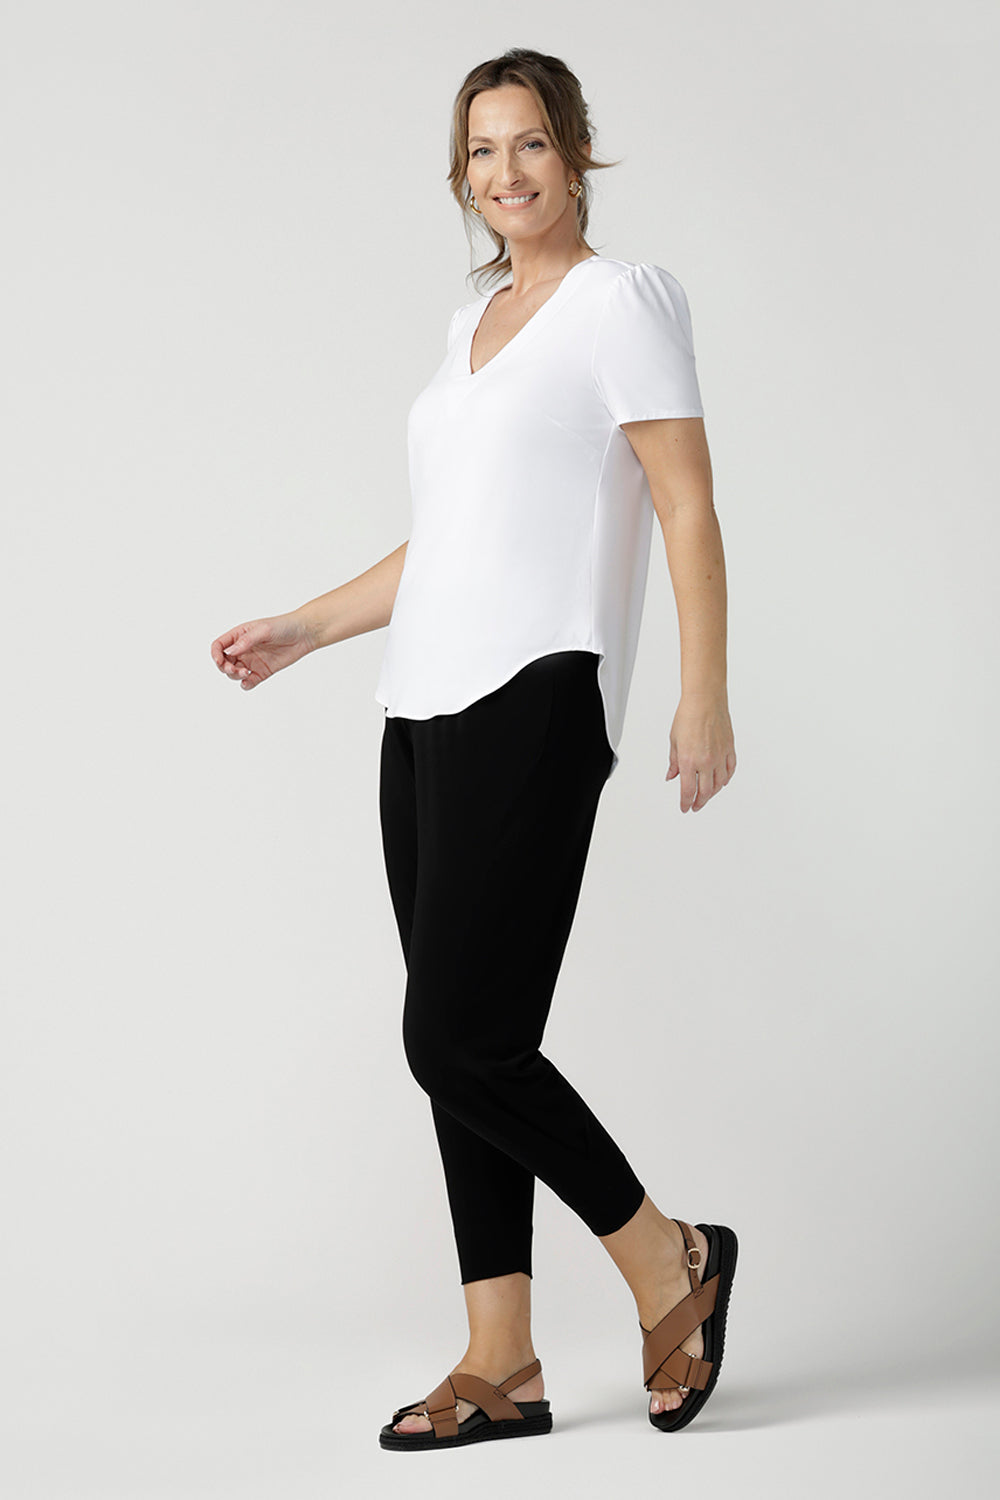 Great pants for travel, these dropped crotch, cropped leg, single seam black pants are made stretchy jersey for ultimate comfort. Worn with white bamboo jersey top , shop these comfy navy pants for your travel and capsule wardrobe now!